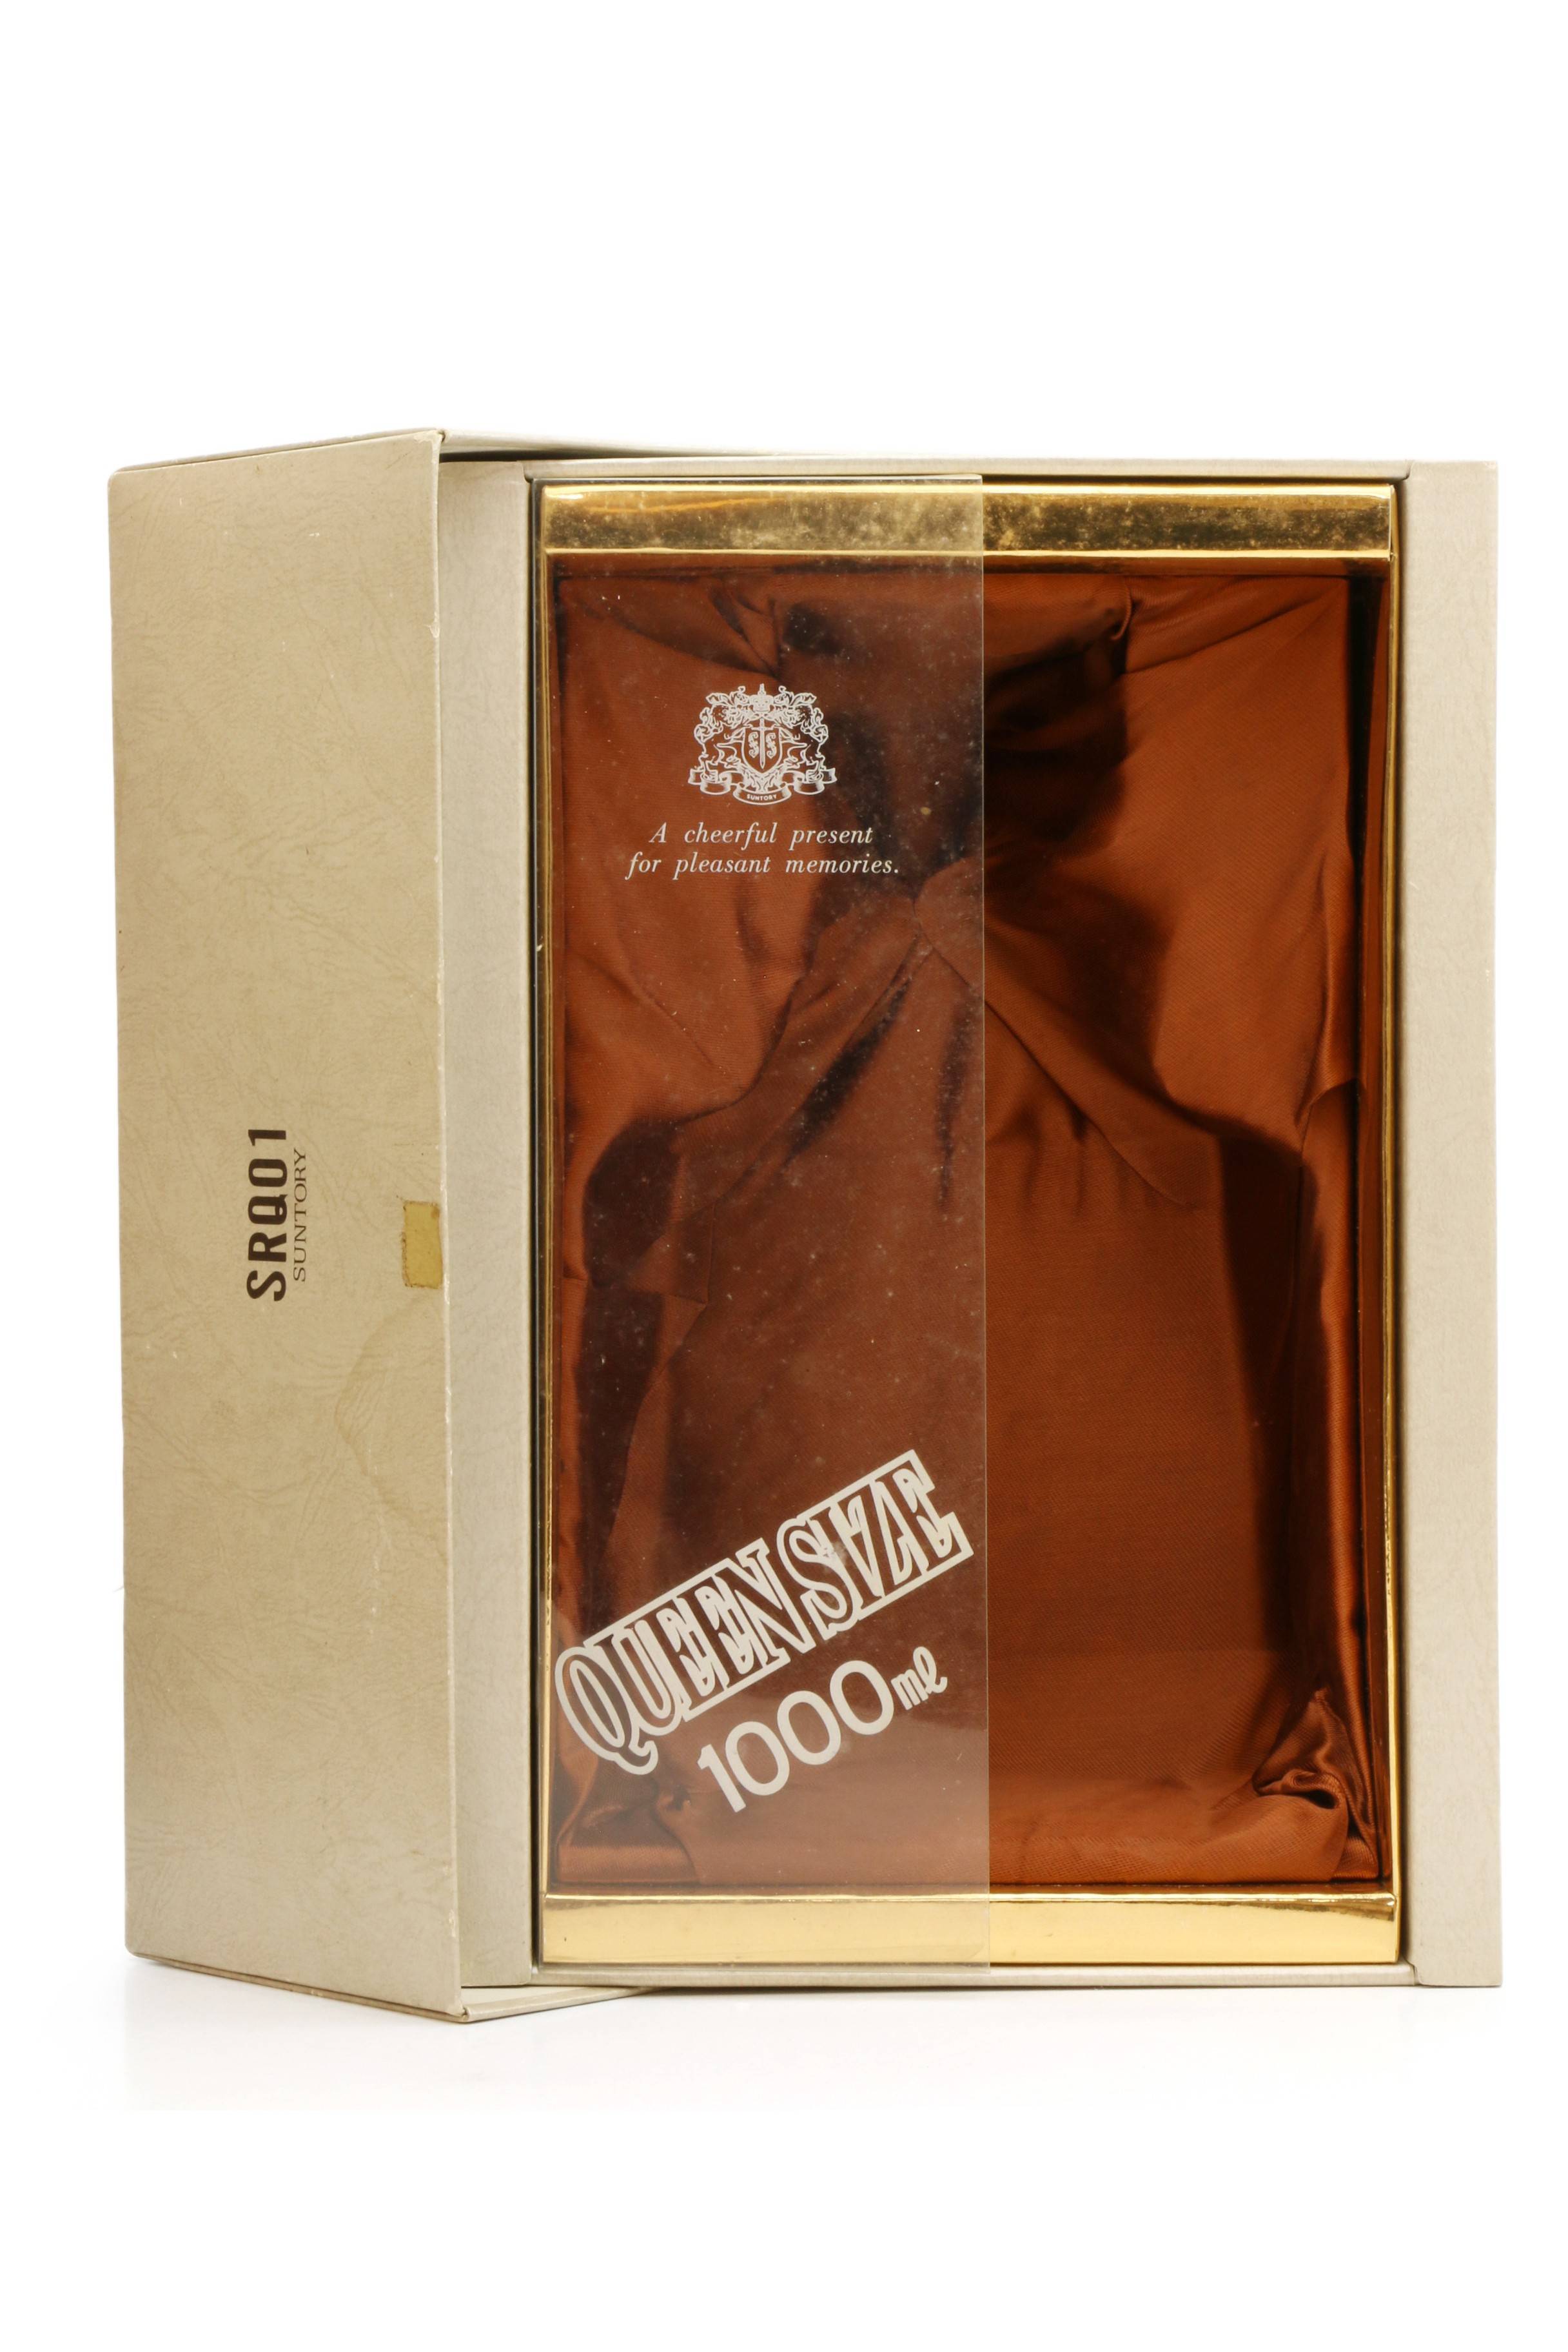 Suntory Royal Special Reserve - Queen Size (1000ml) - Just Whisky